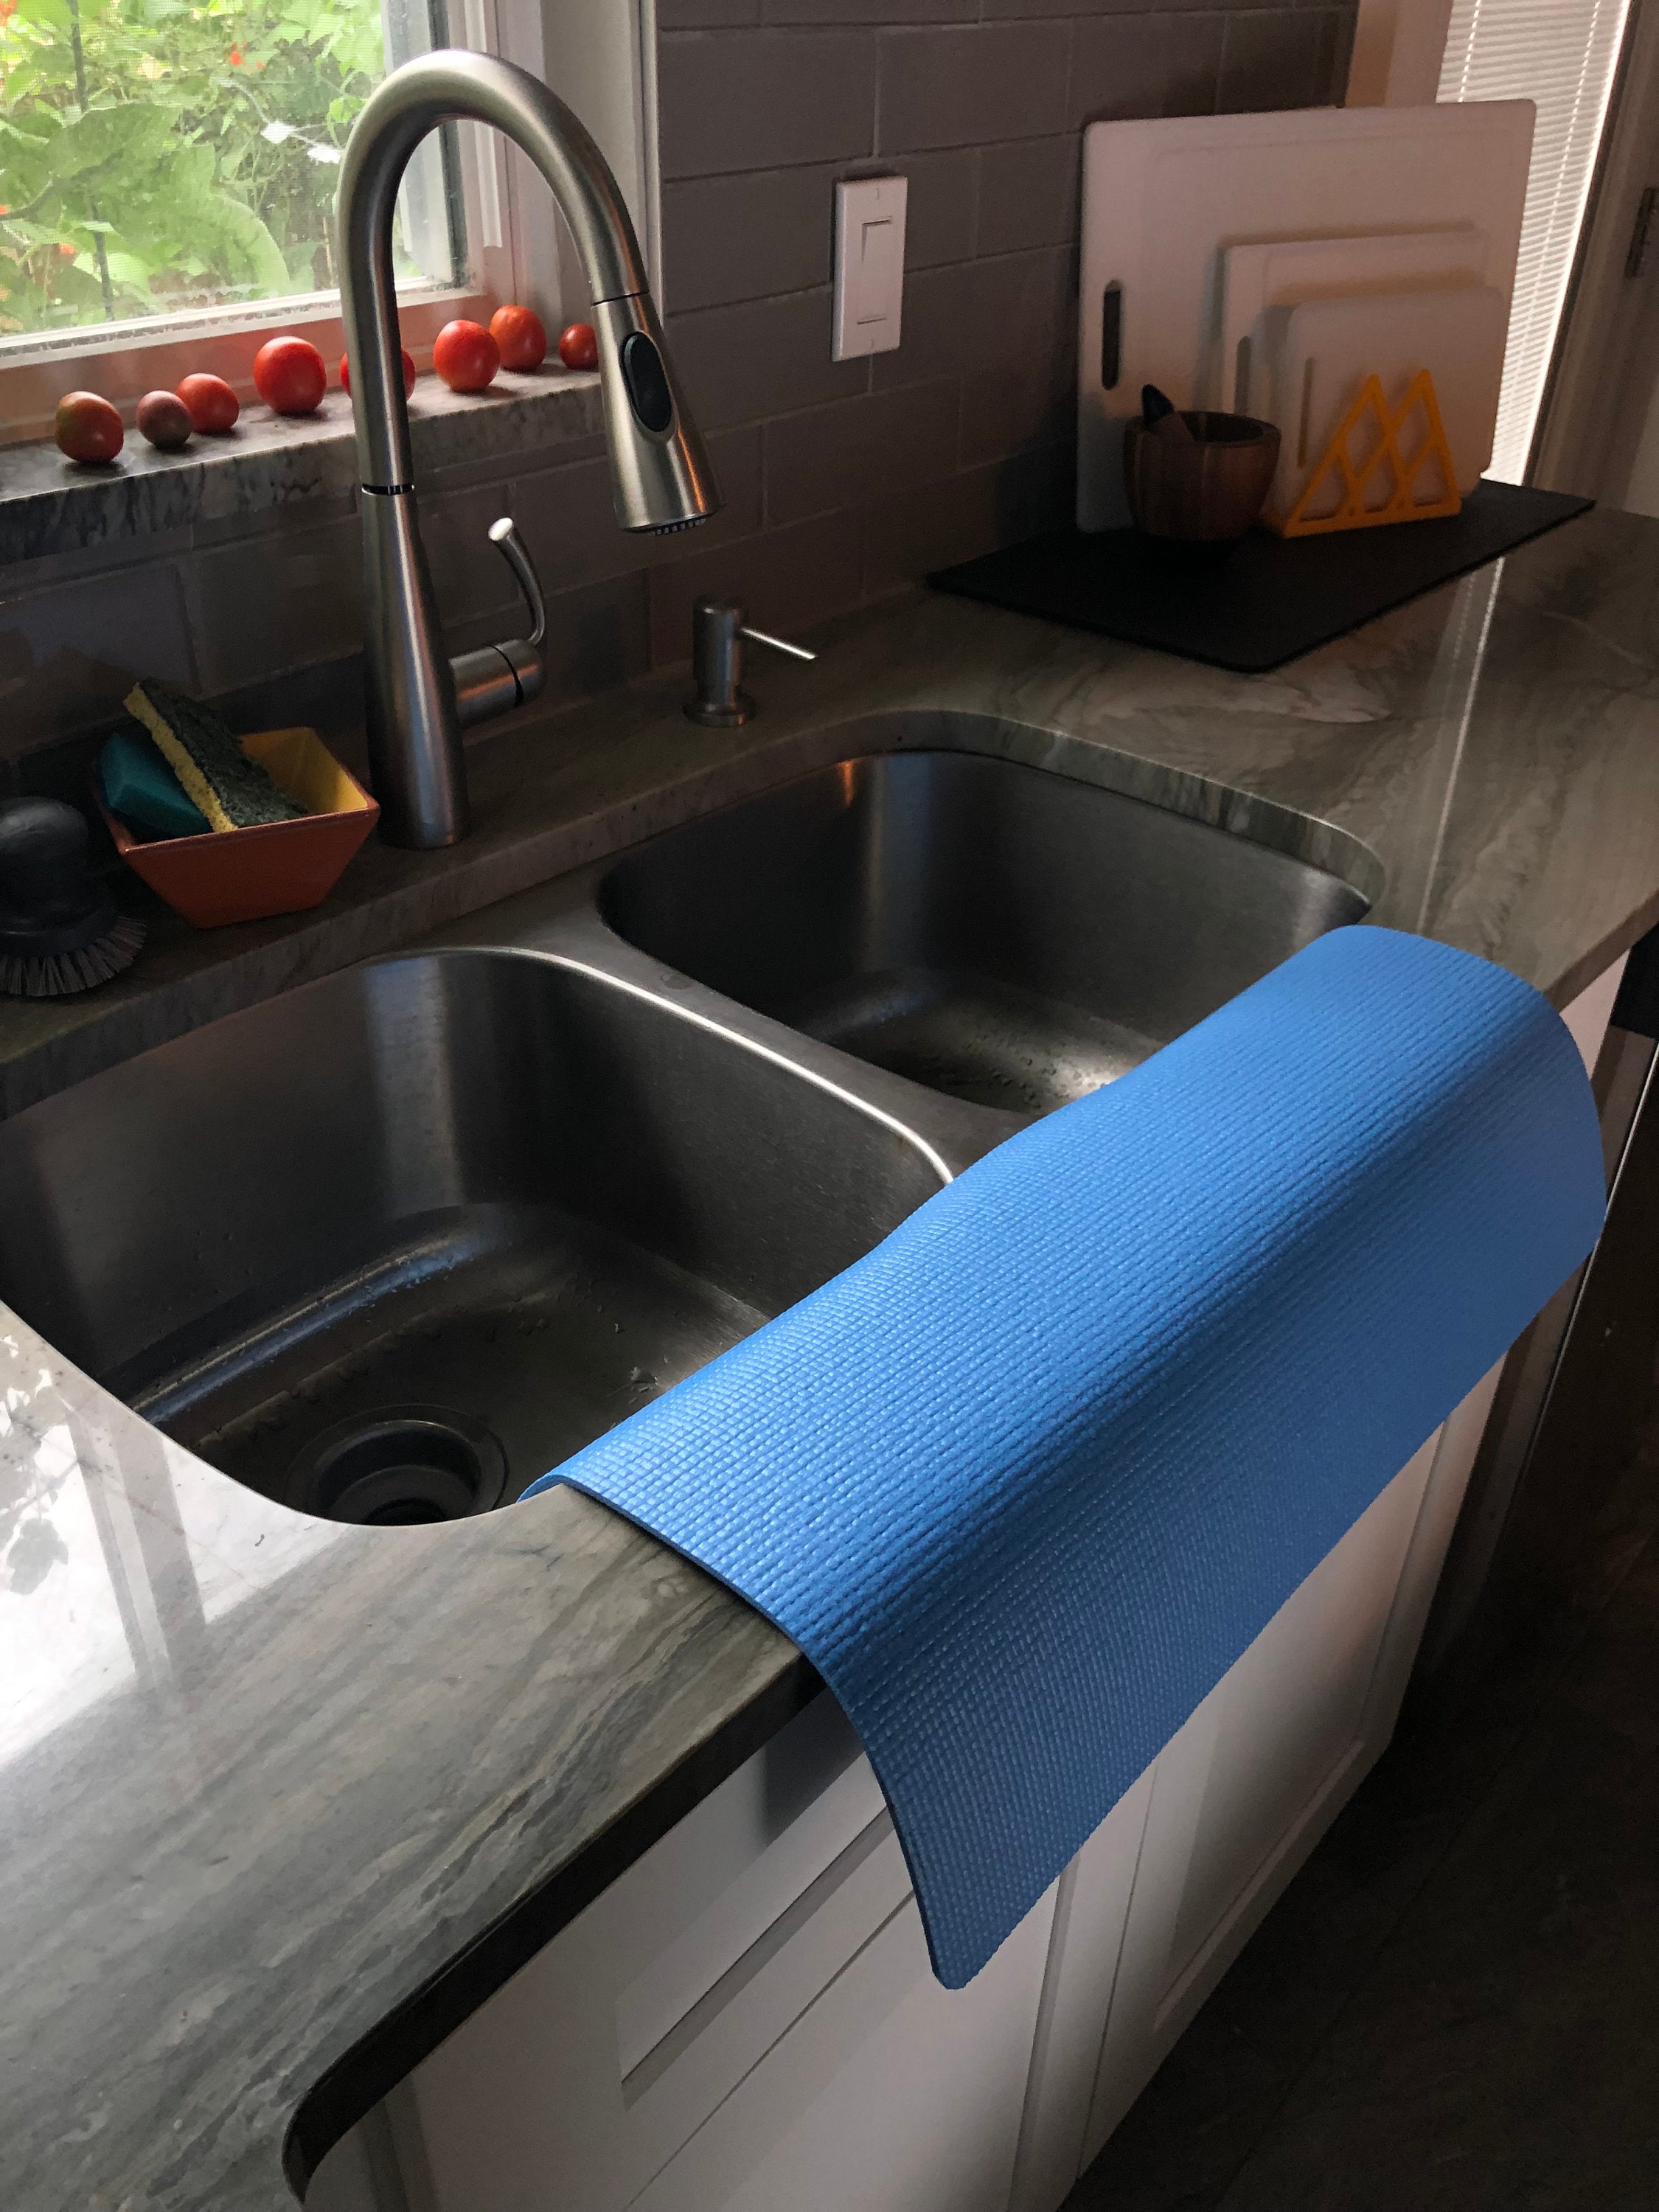 Sussexhome Under Sink Mat - Ultra-Absorbent Cotton Shelf Liners for Kitchen Cabinets - Non-Slip, Waterproof Backing - Machine Washable Surface